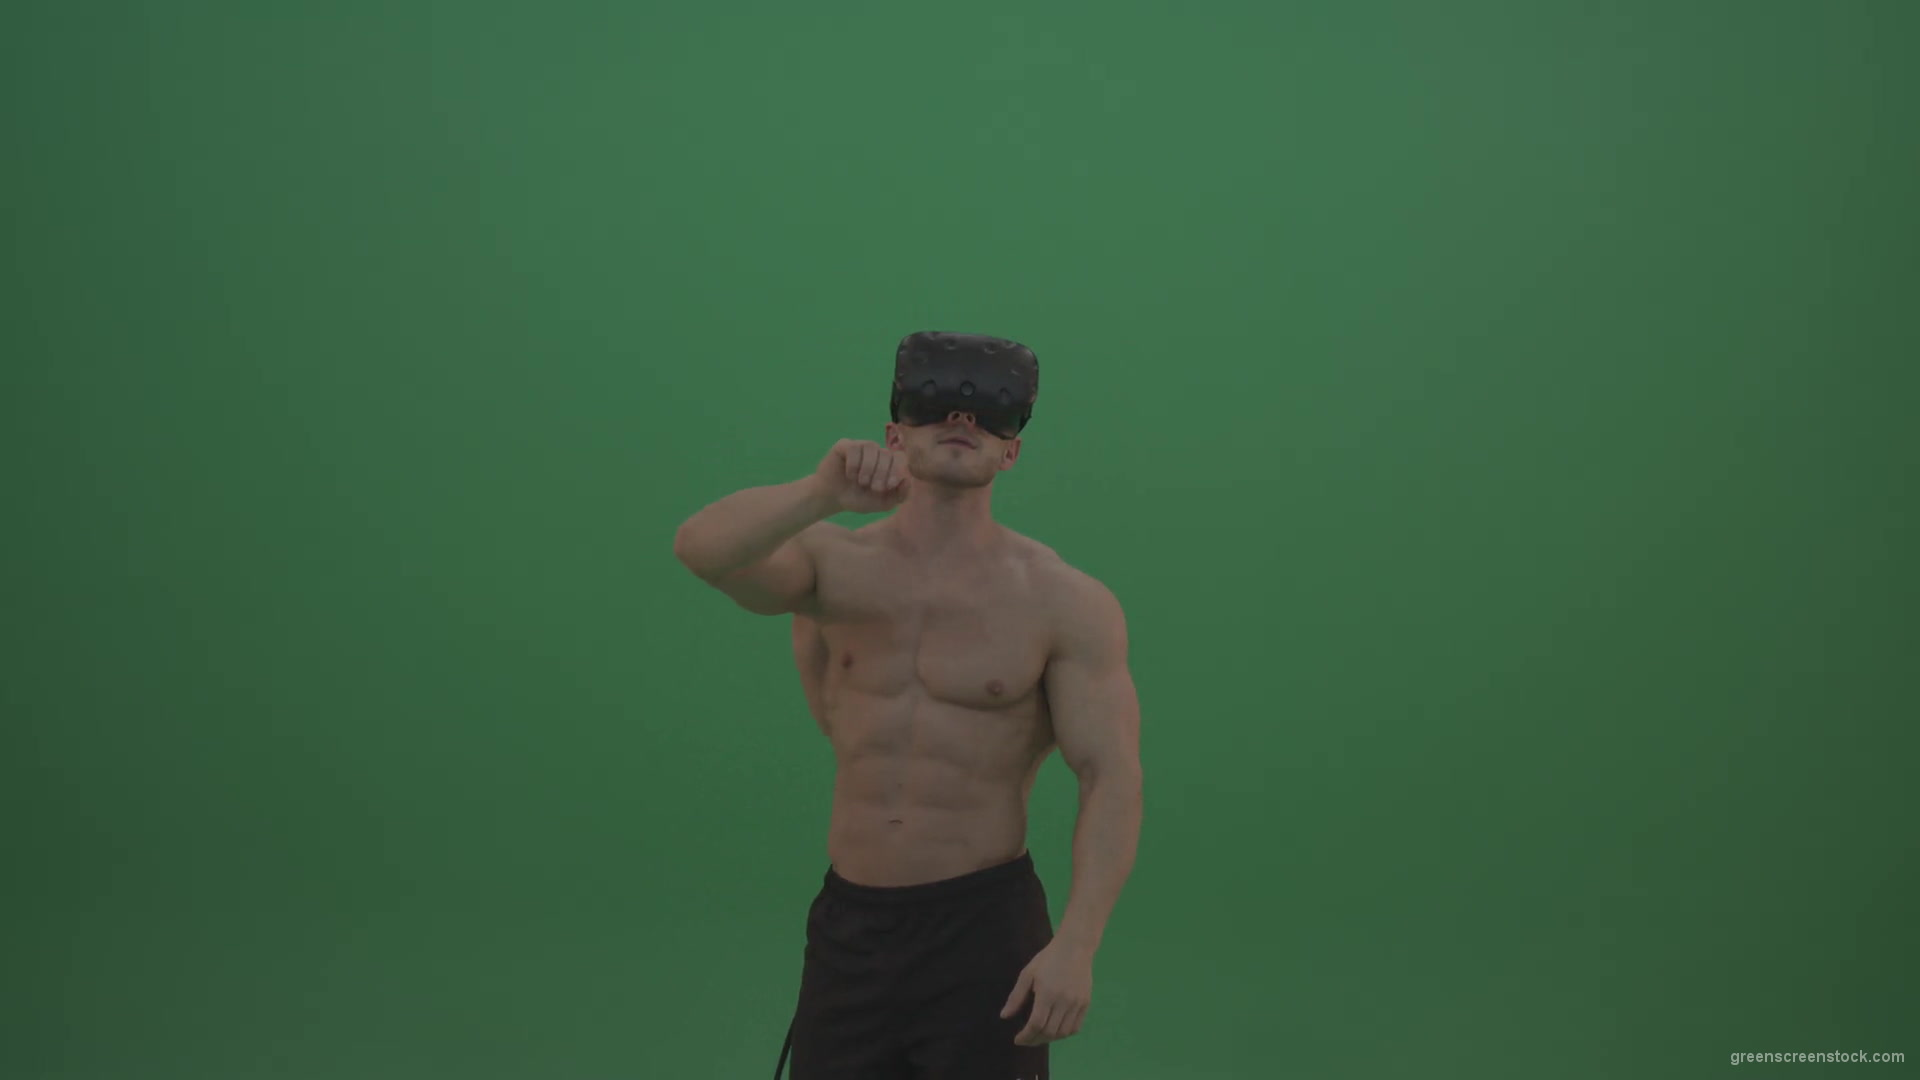 vj video background Young_Athletic_Bodybuilder_Working_On_Touch_Pad_Using_Virtual_Reality_Kit_On_Green_Screen_Wall_Background-1920_003